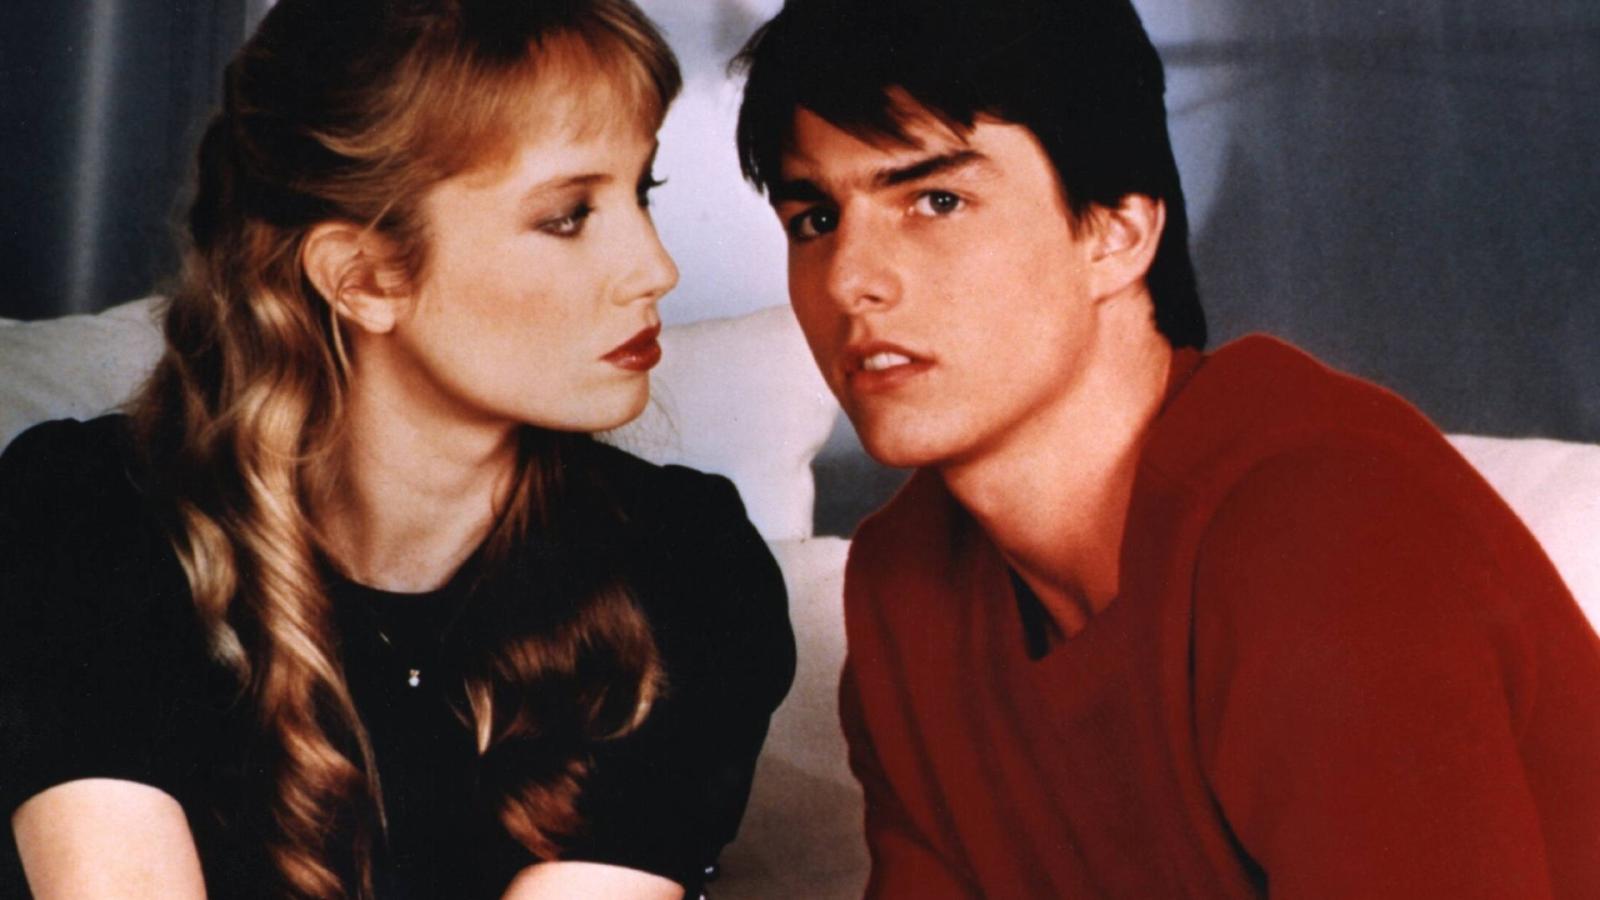 15 Coming-of-Age Movies that Defined the 80s - image 13